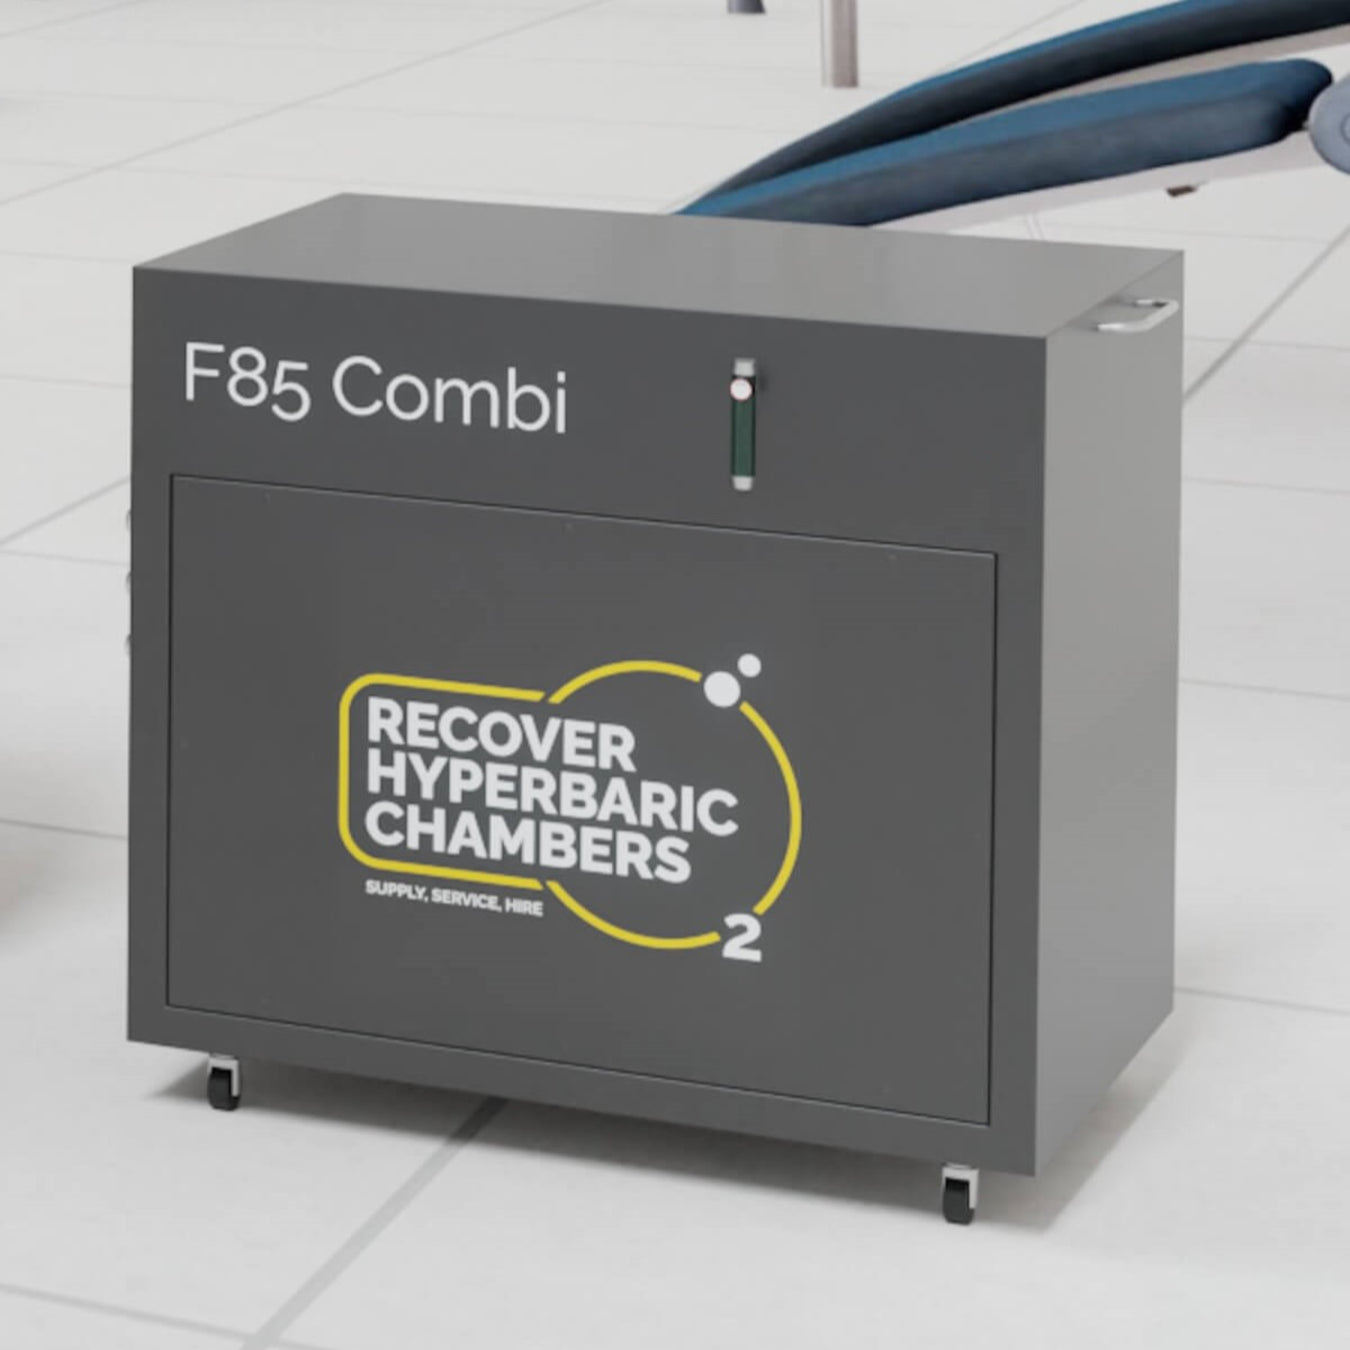 Recover hyperbaric chamber f85 compressor on white tiles